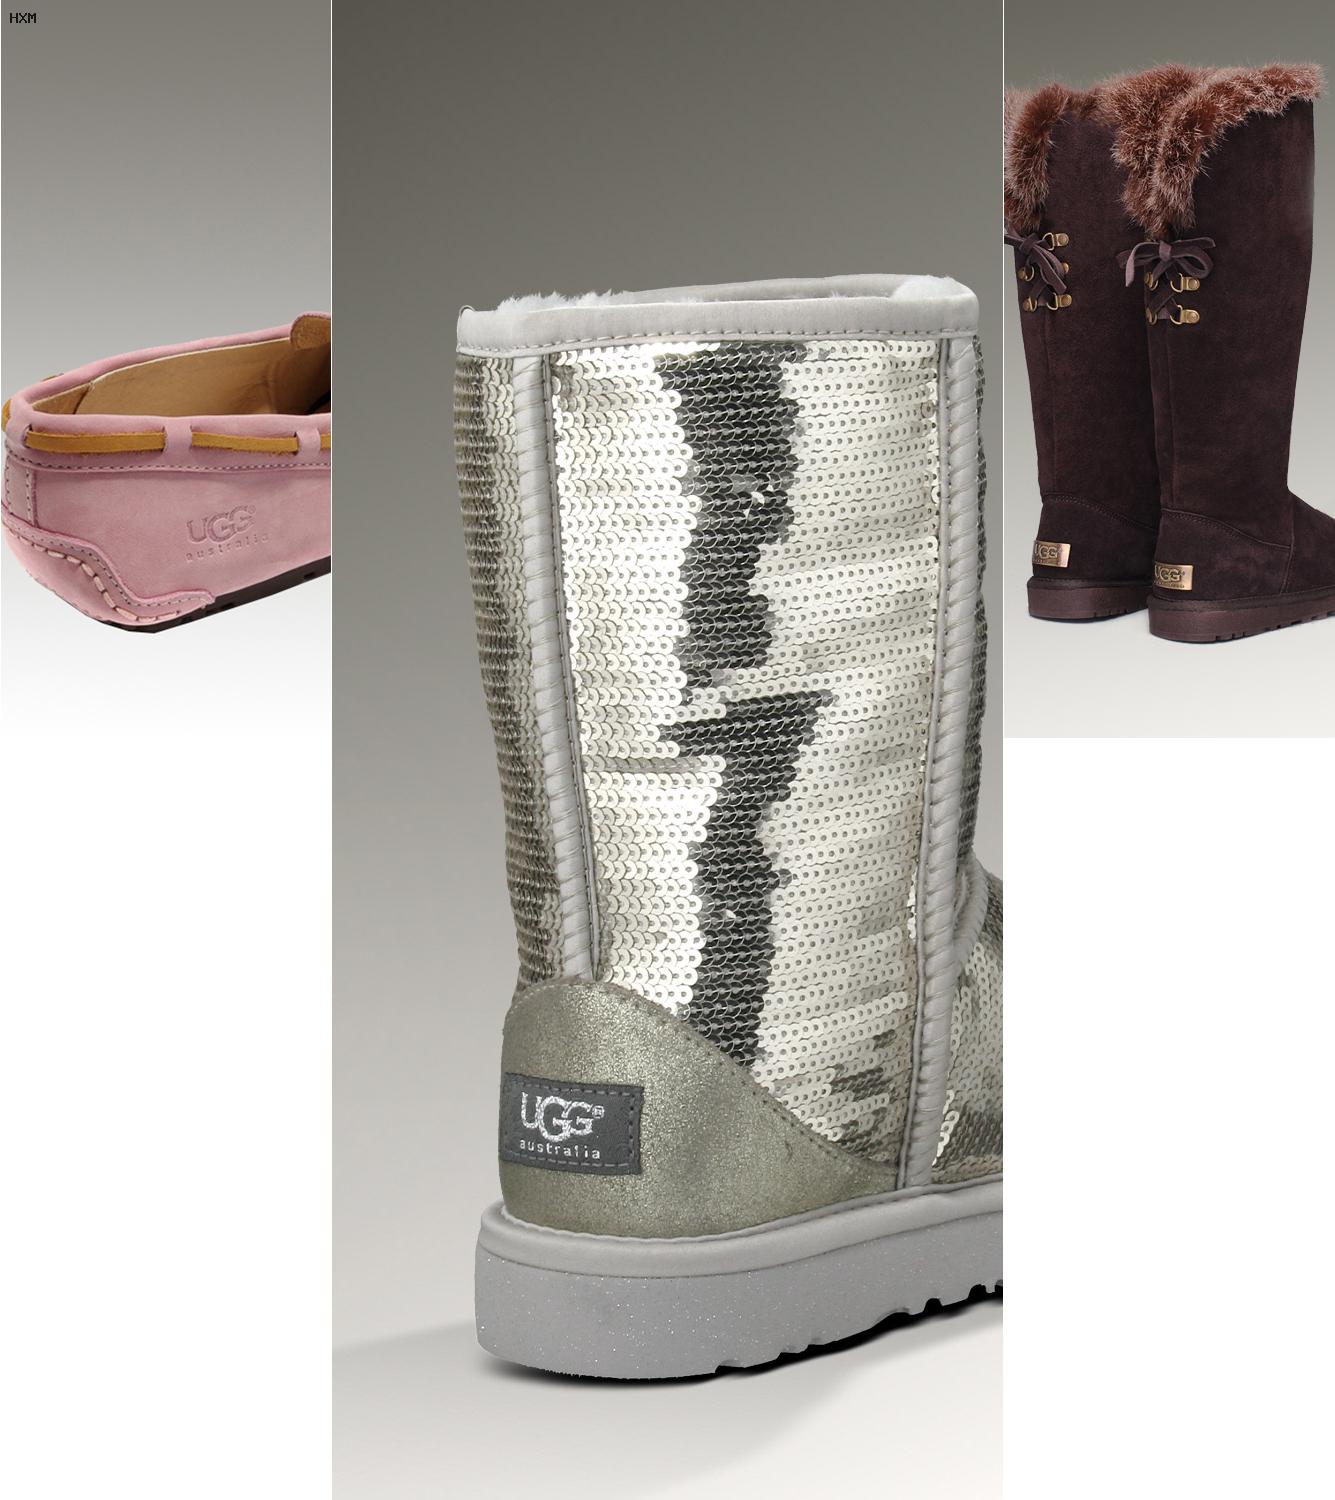 bottes ugg 1873 bailey button triplet